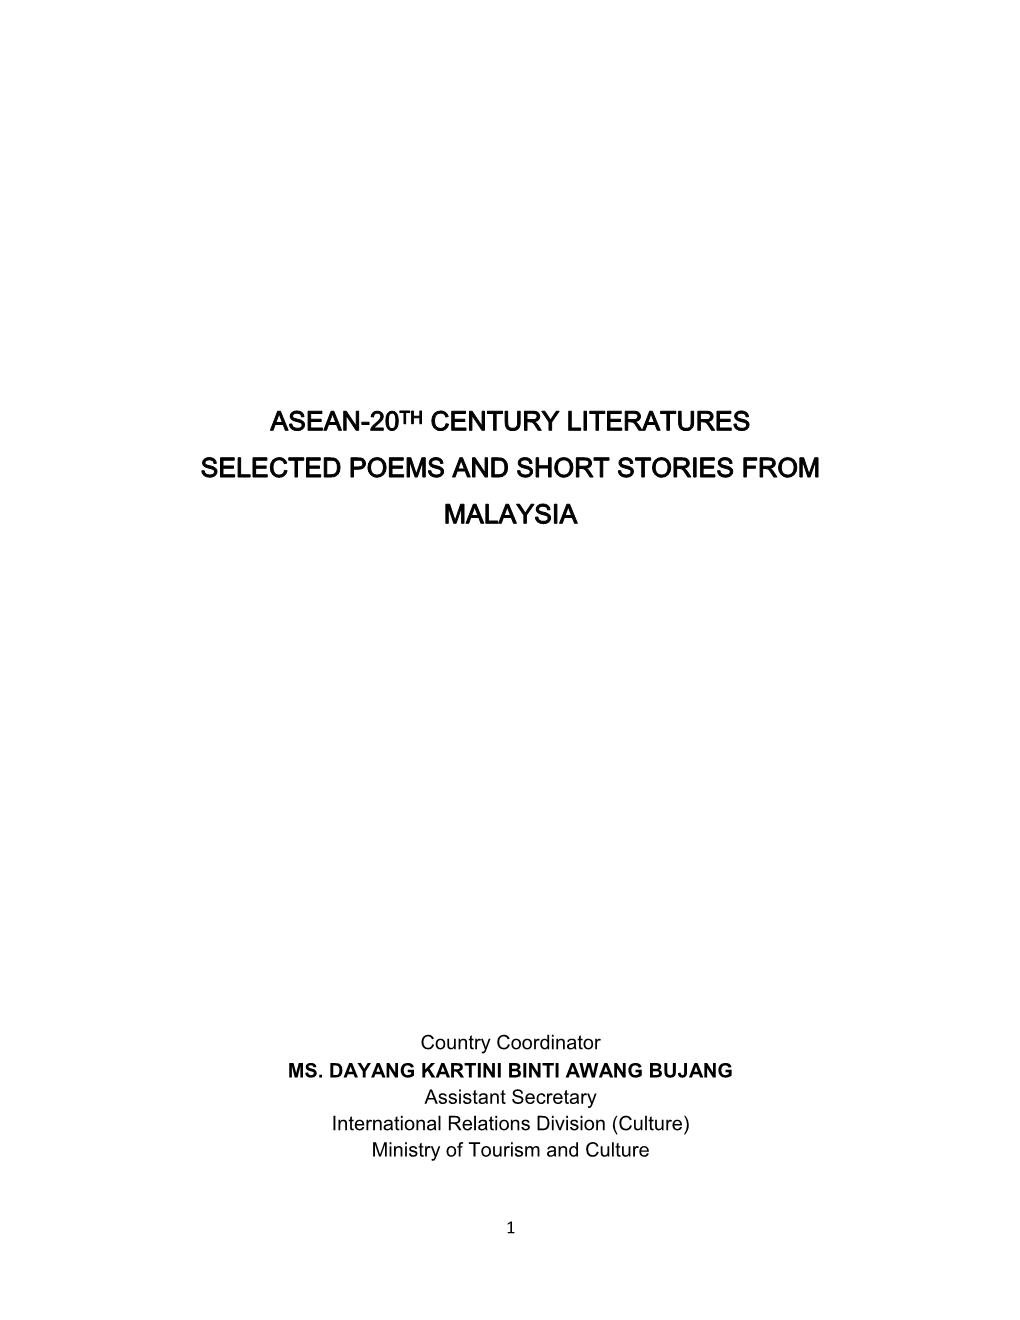 Asean-20Th Century Literatures Selected Poems and Short Stories From